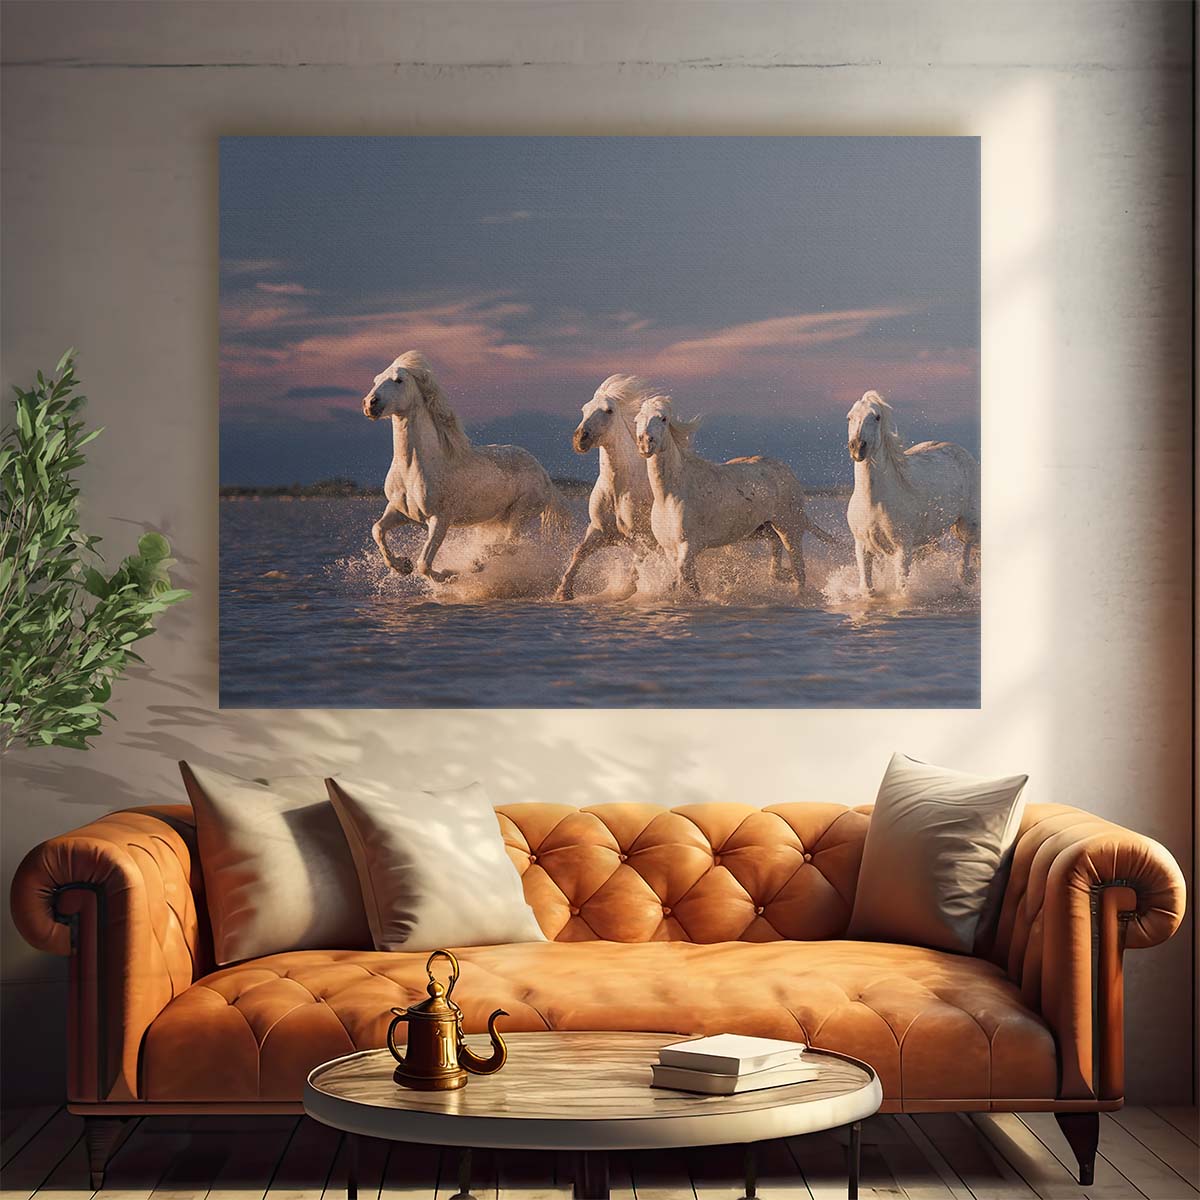 Camargue Horses' Sunset Sprint in Water Wall Art by Luxuriance Designs. Made in USA.